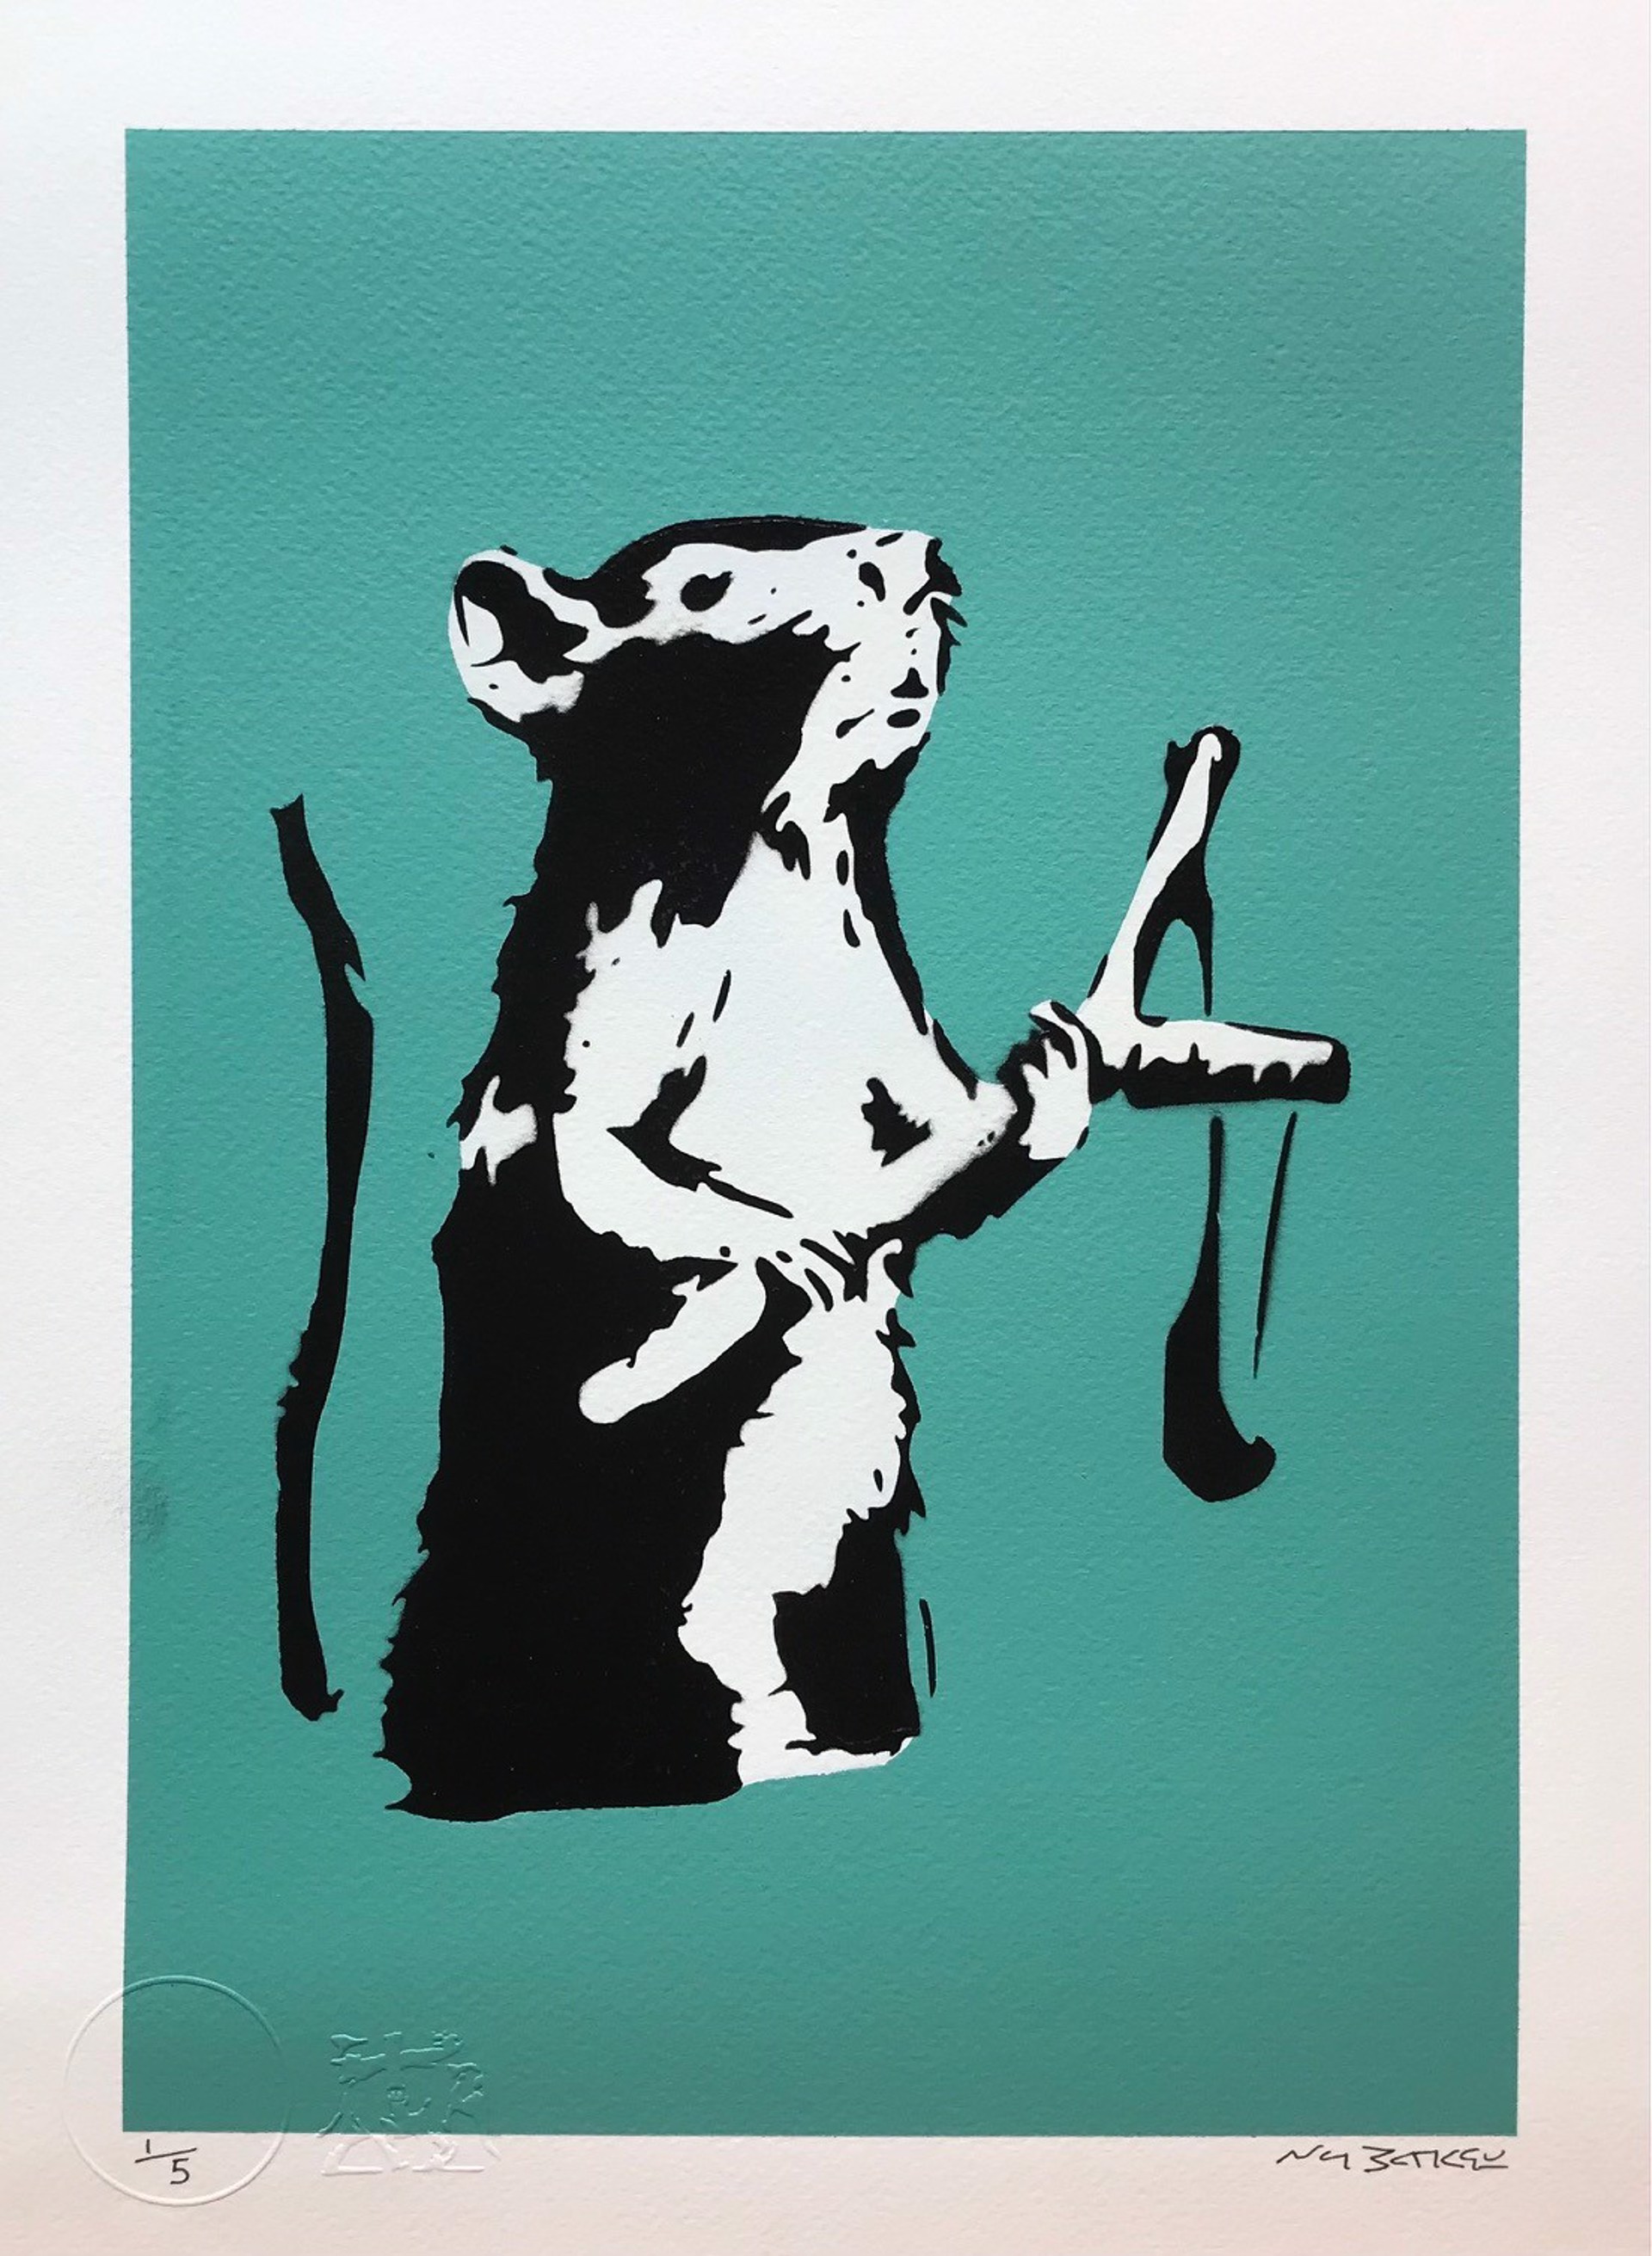 Rat with Catapult - Aquamarine by Not Banksy